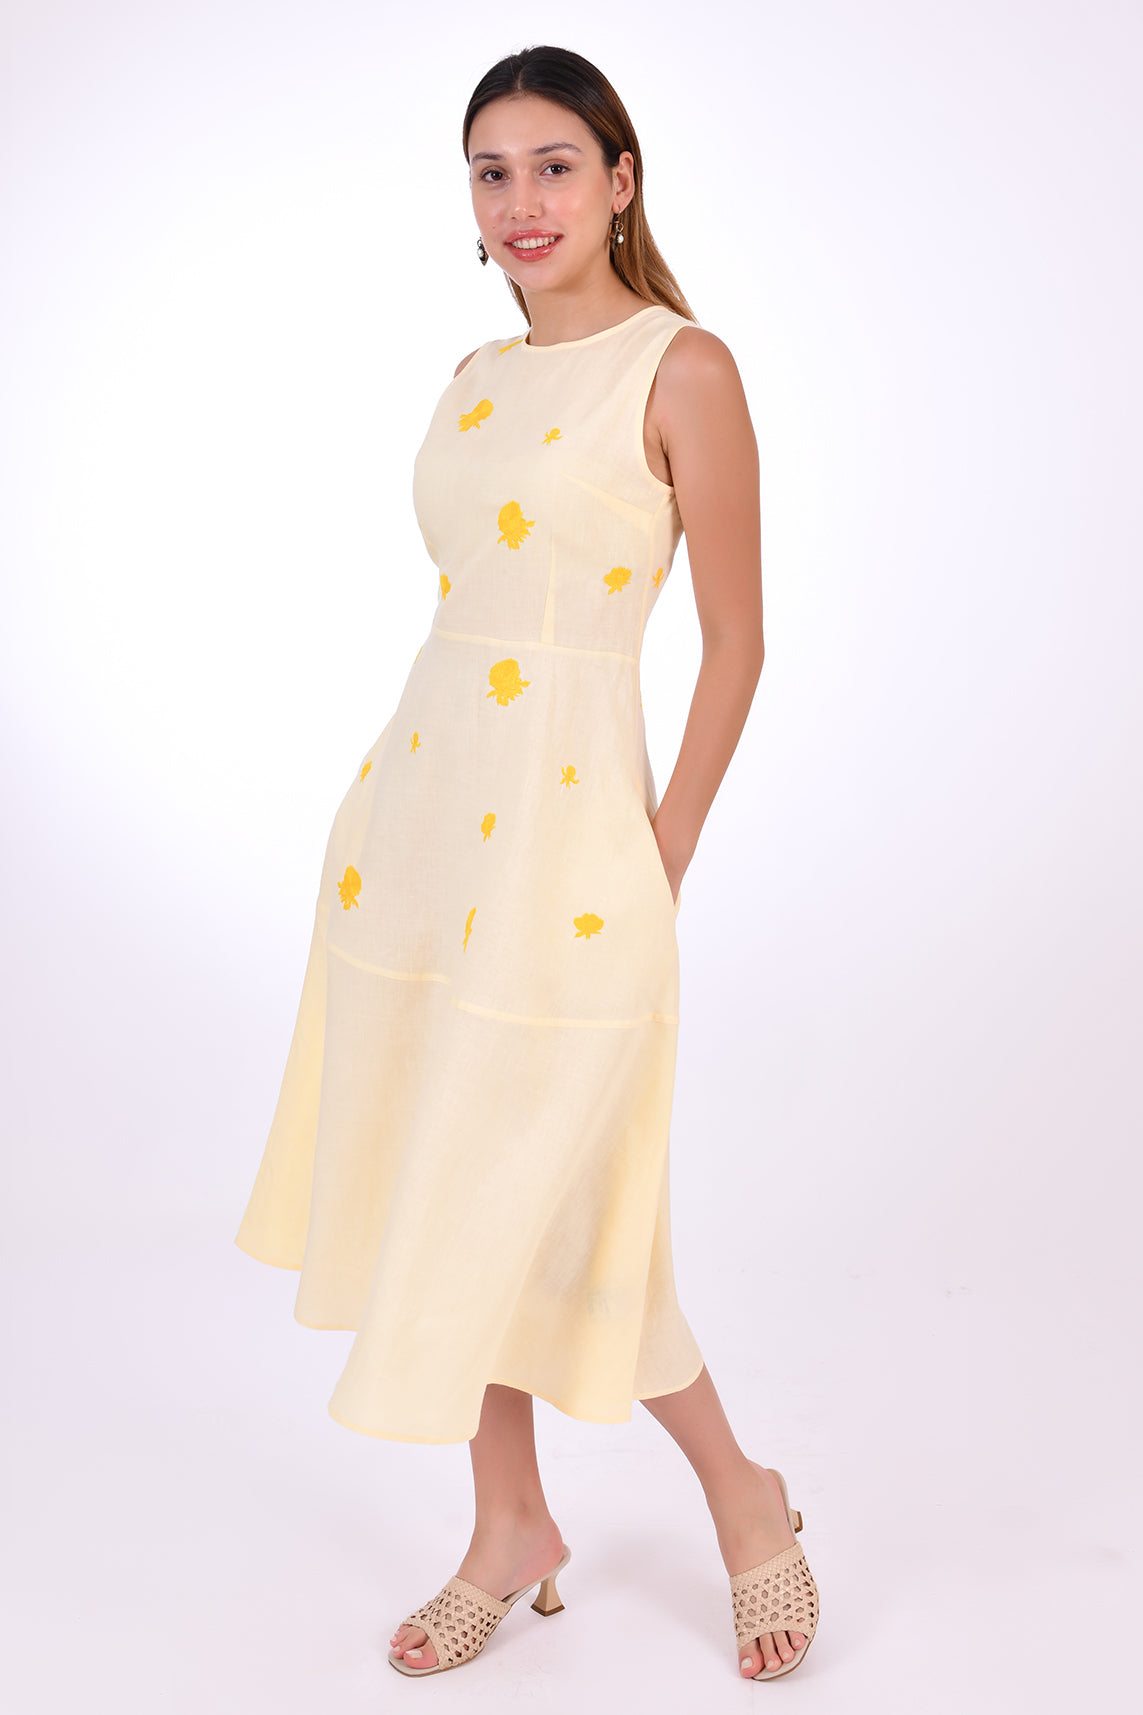 Fanm Mon Elvan Linen Dress, Made to Measure. SIde view showcasing pockets and floral embroidery detail.